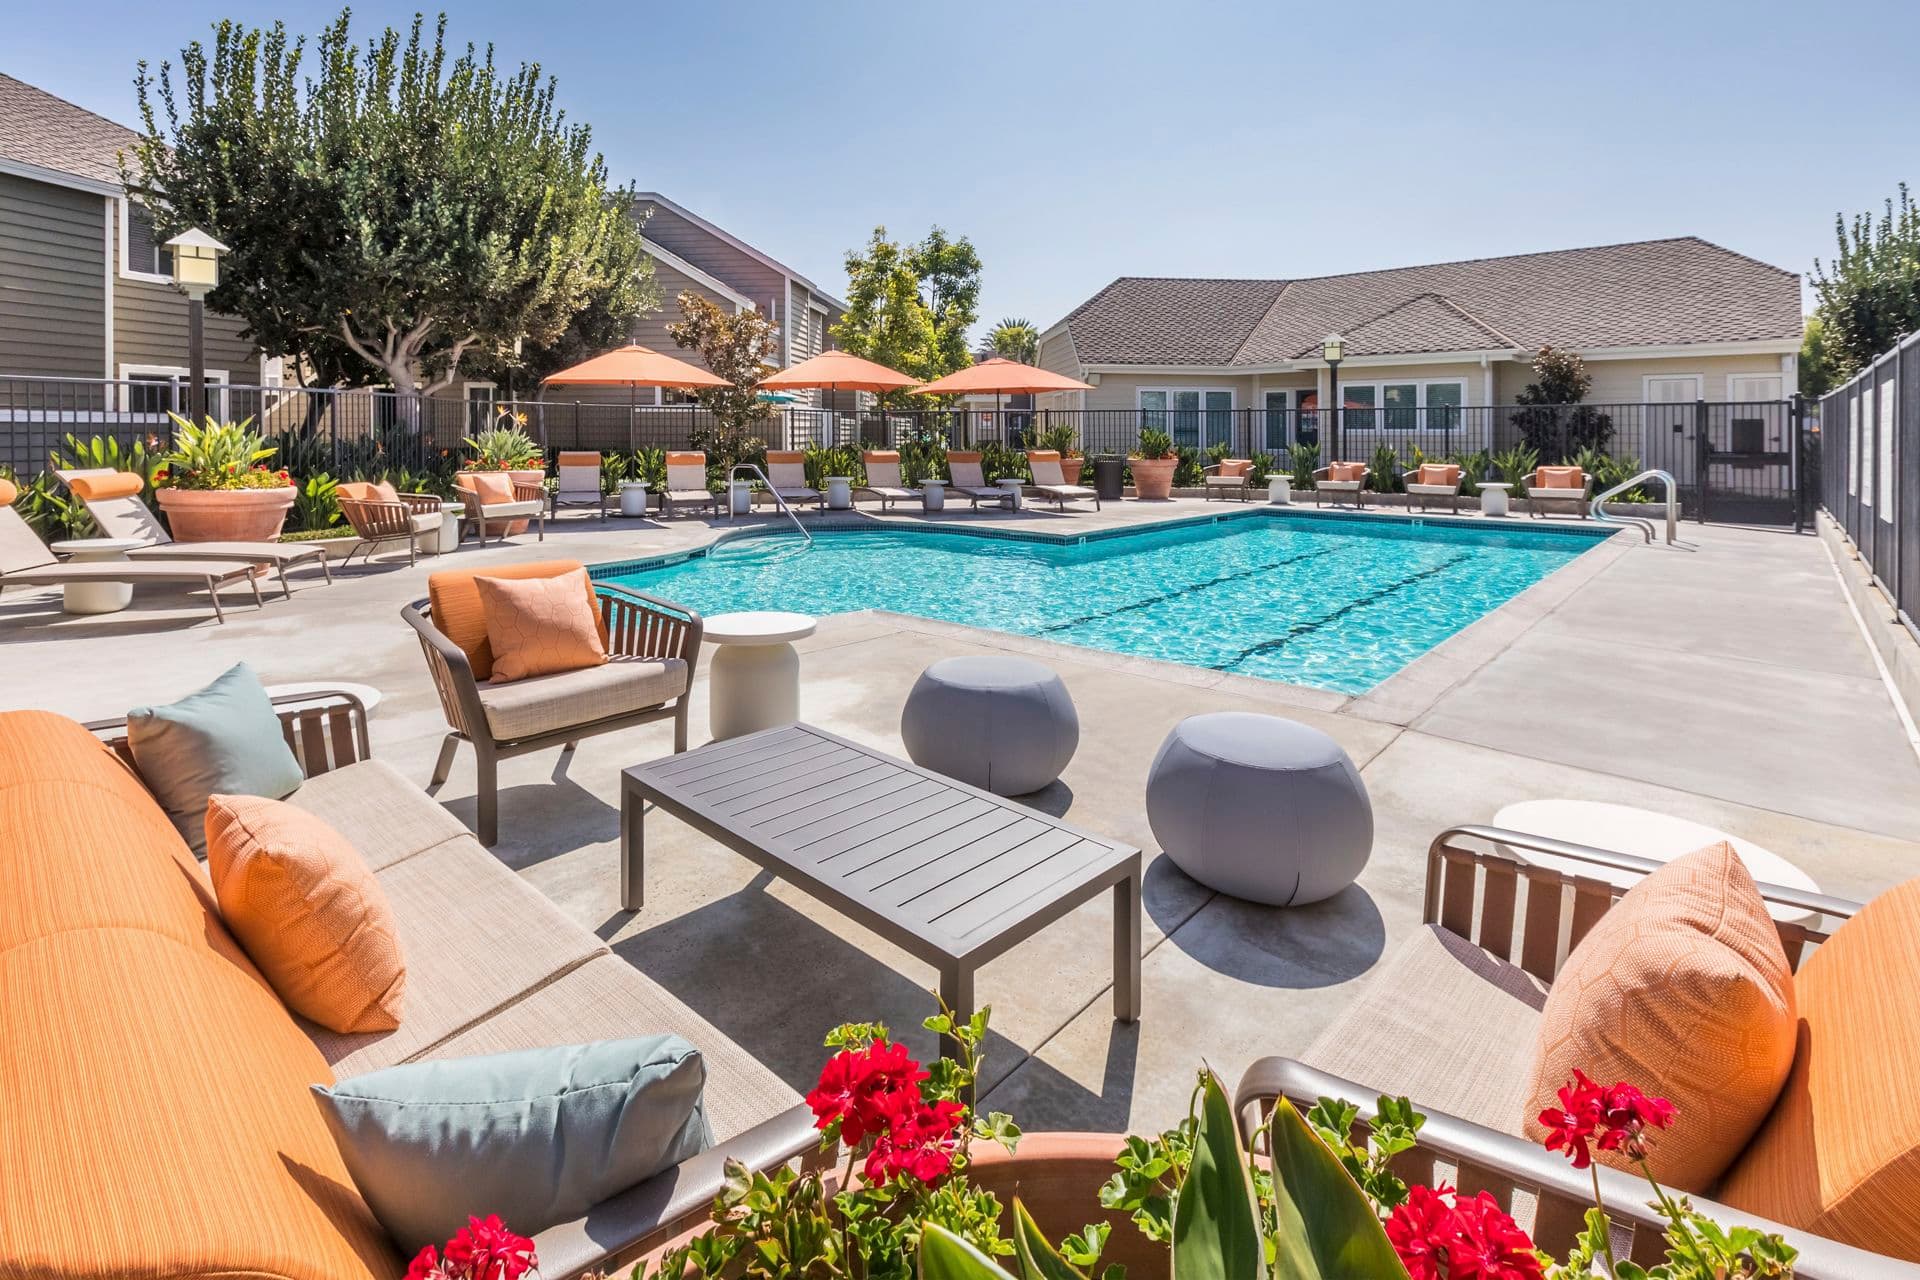 Exterior view of pool area at Windwood Glen Apartment Homes in Irvine, CA.